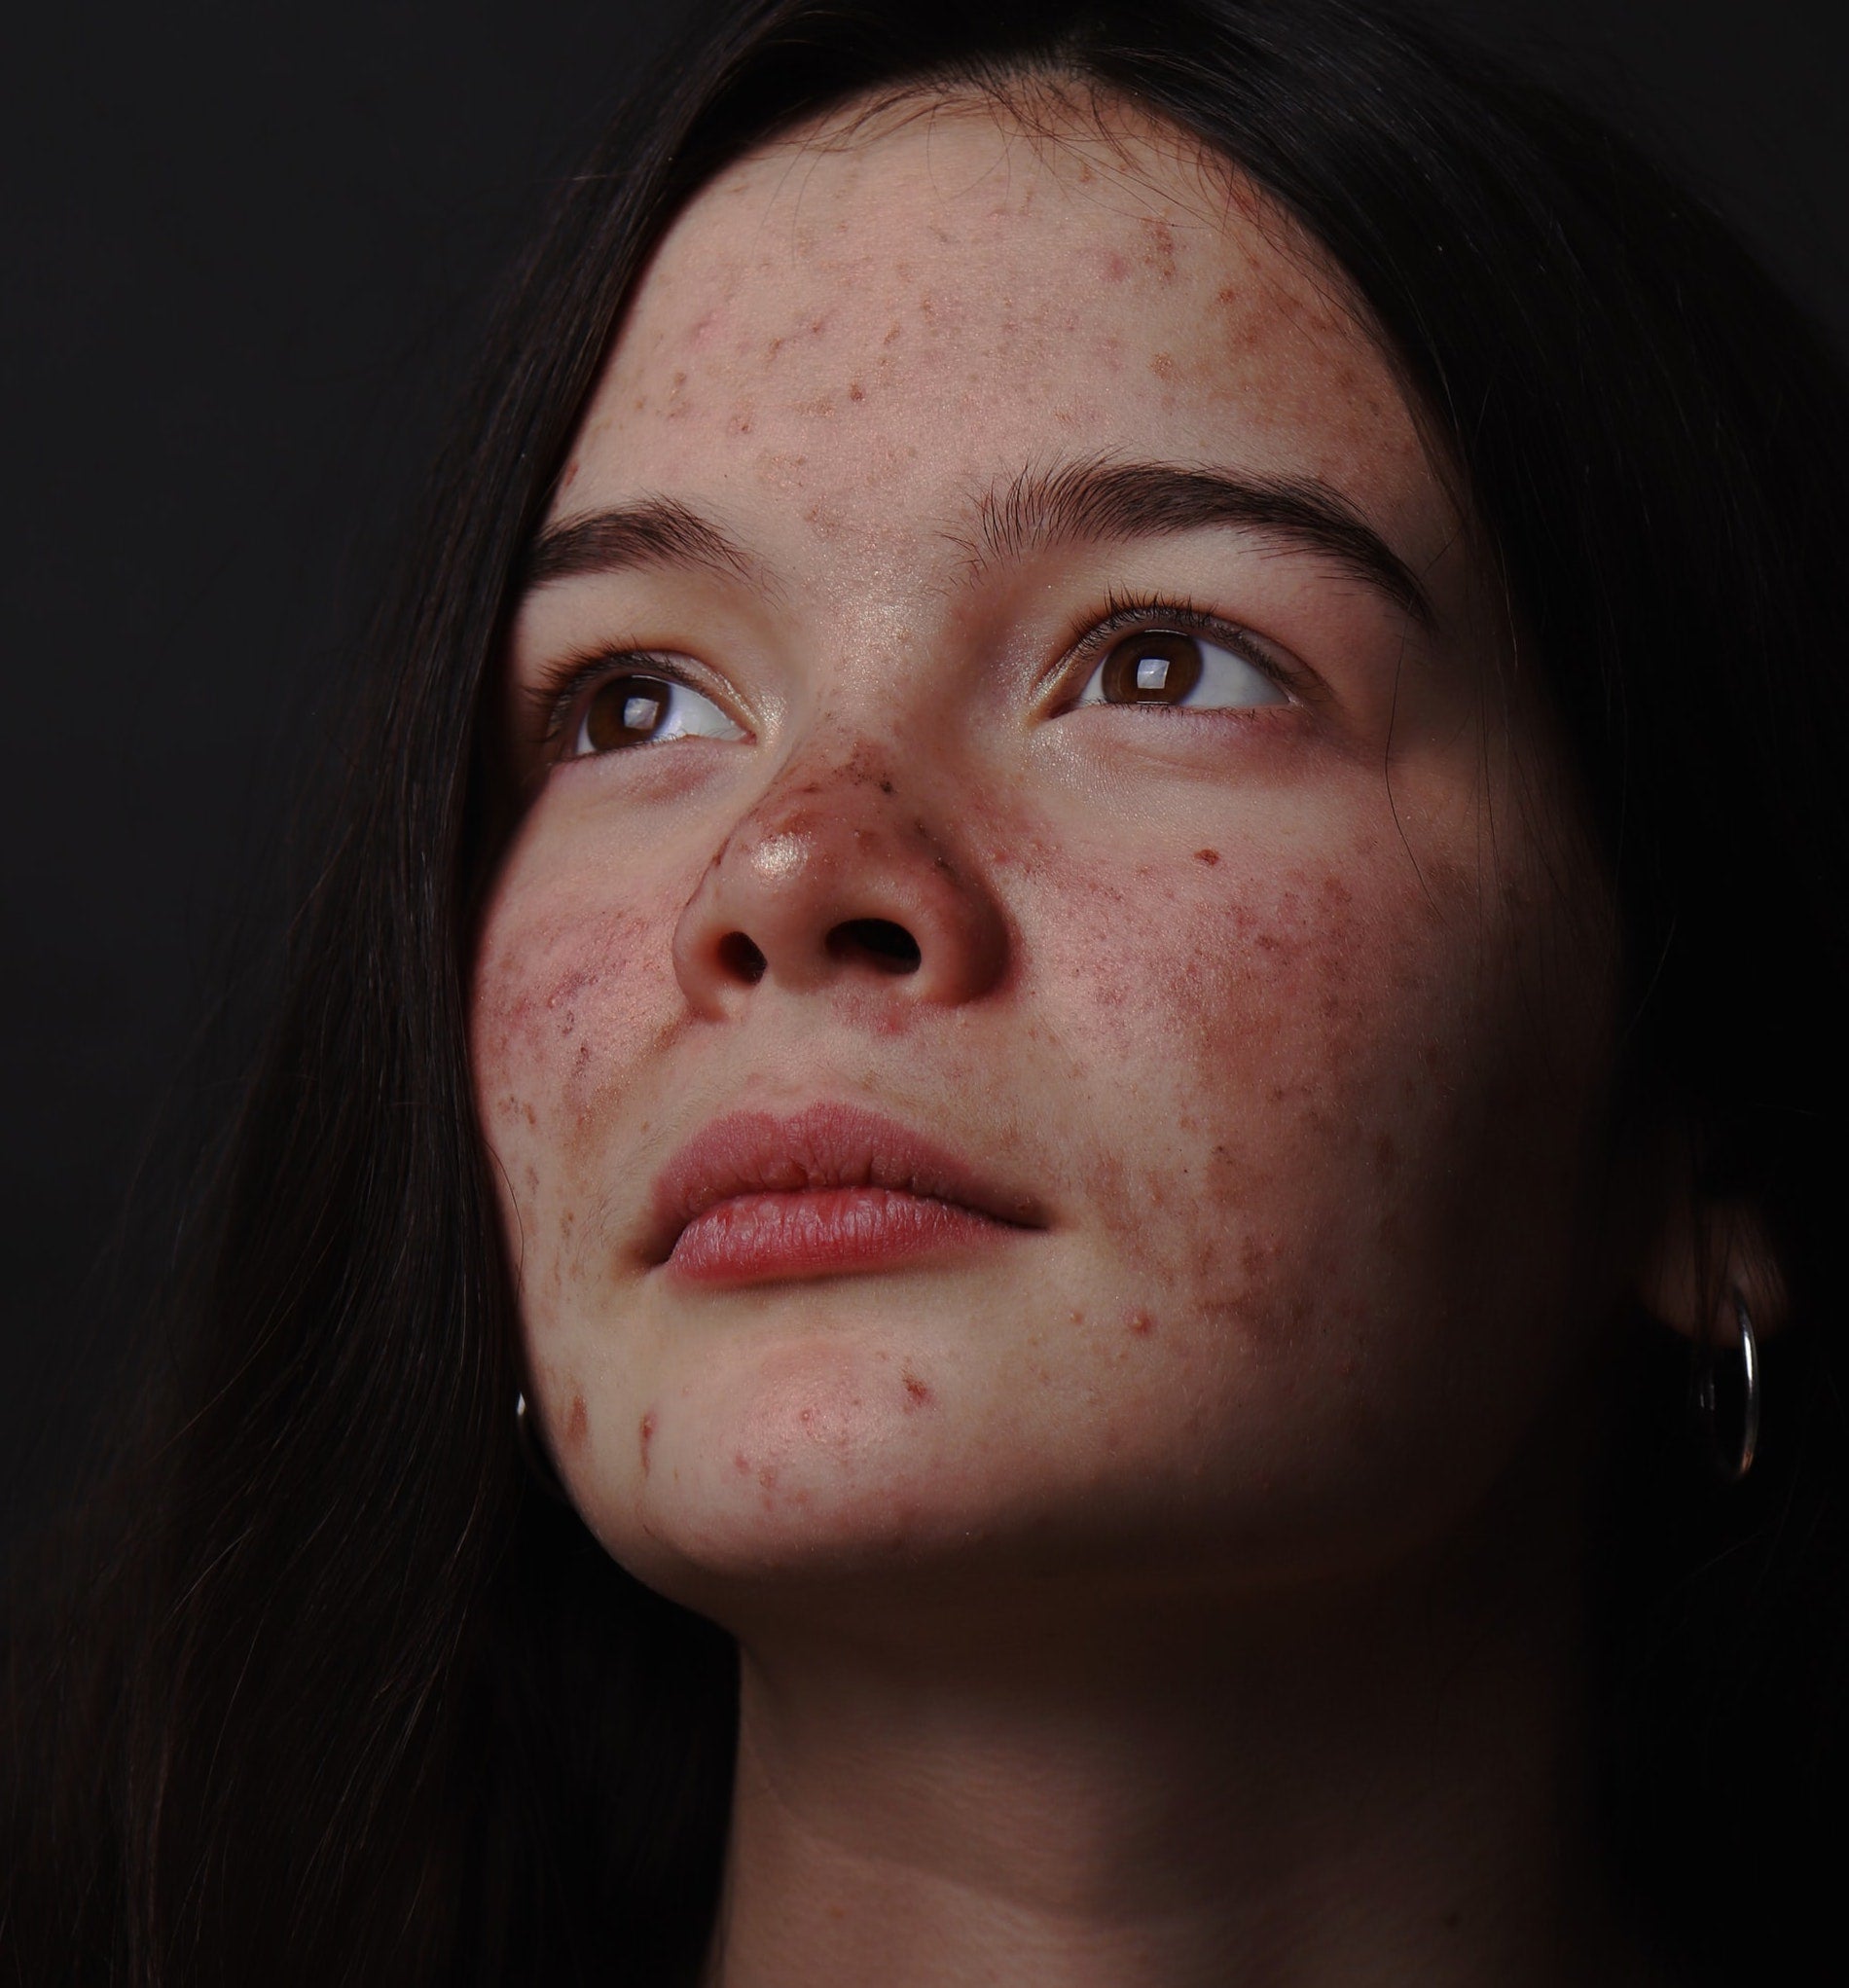 Photo of young woman with facial acne on dark background.